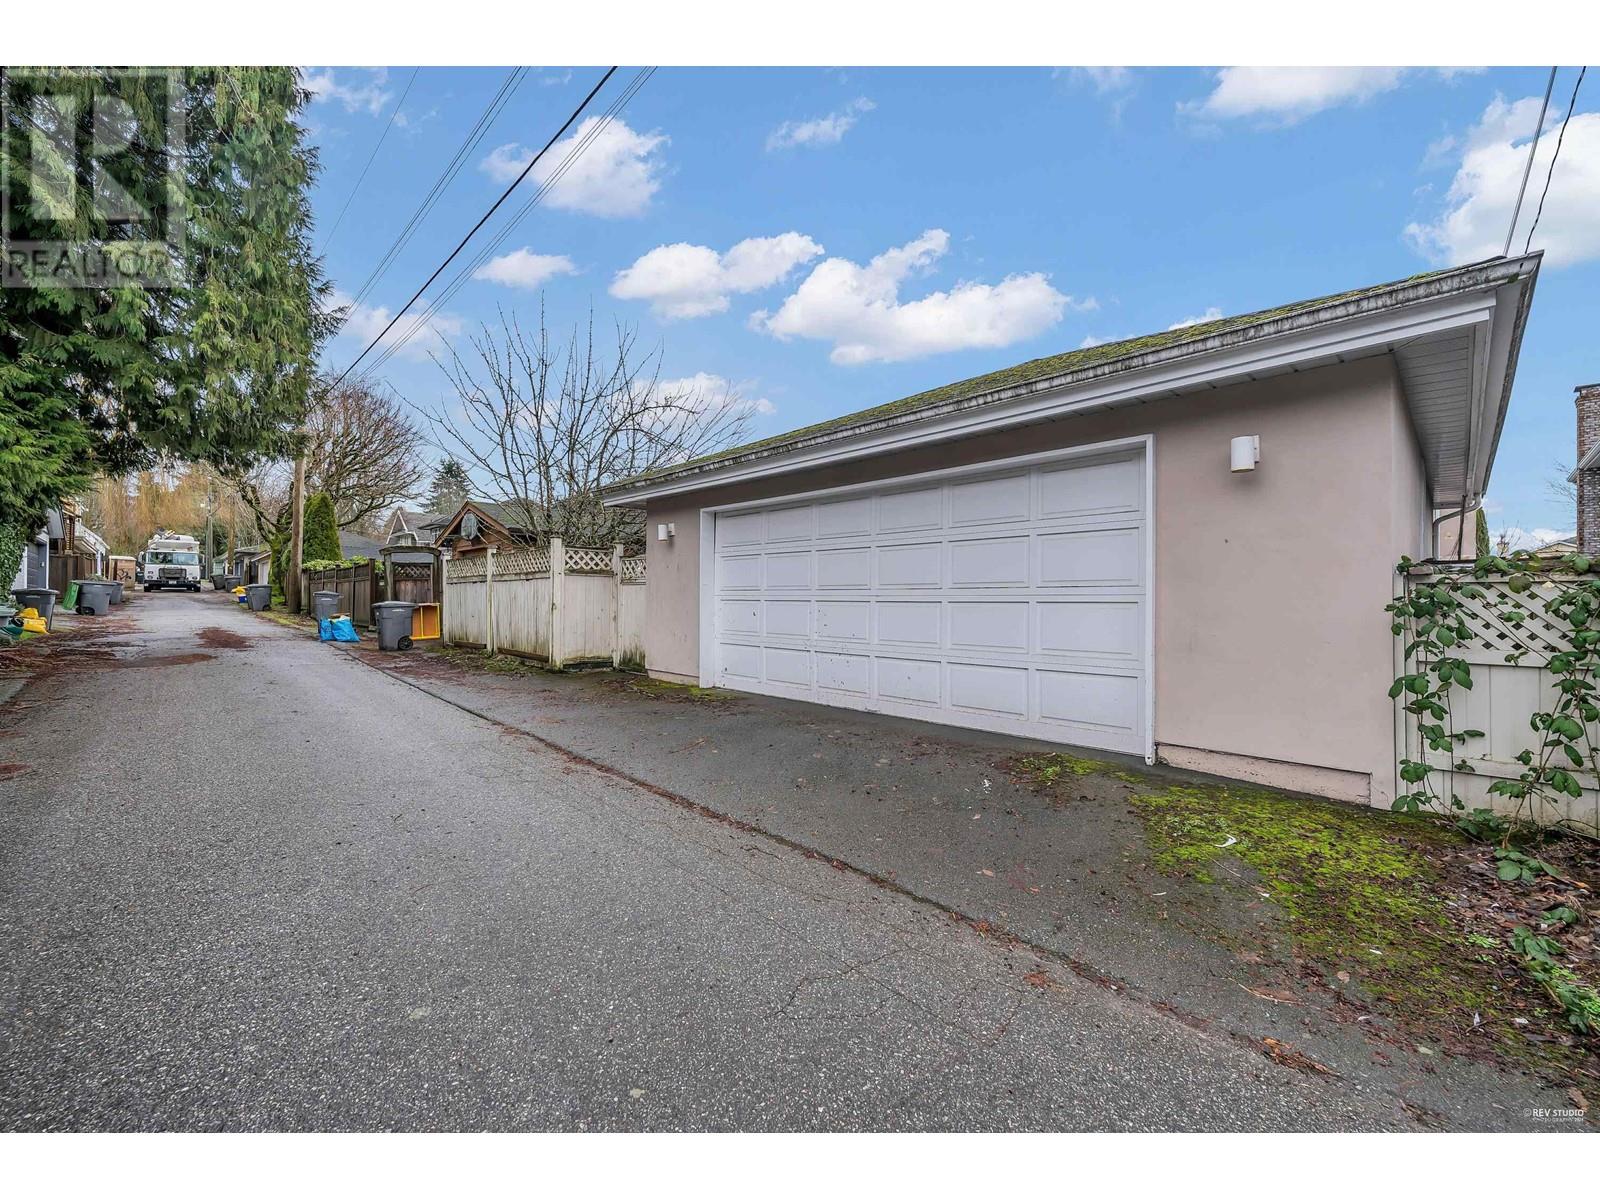 Listing Picture 32 of 32 : 1945 W 44TH AVENUE, Vancouver / 溫哥華 - 魯藝地產 Yvonne Lu Group - MLS Medallion Club Member